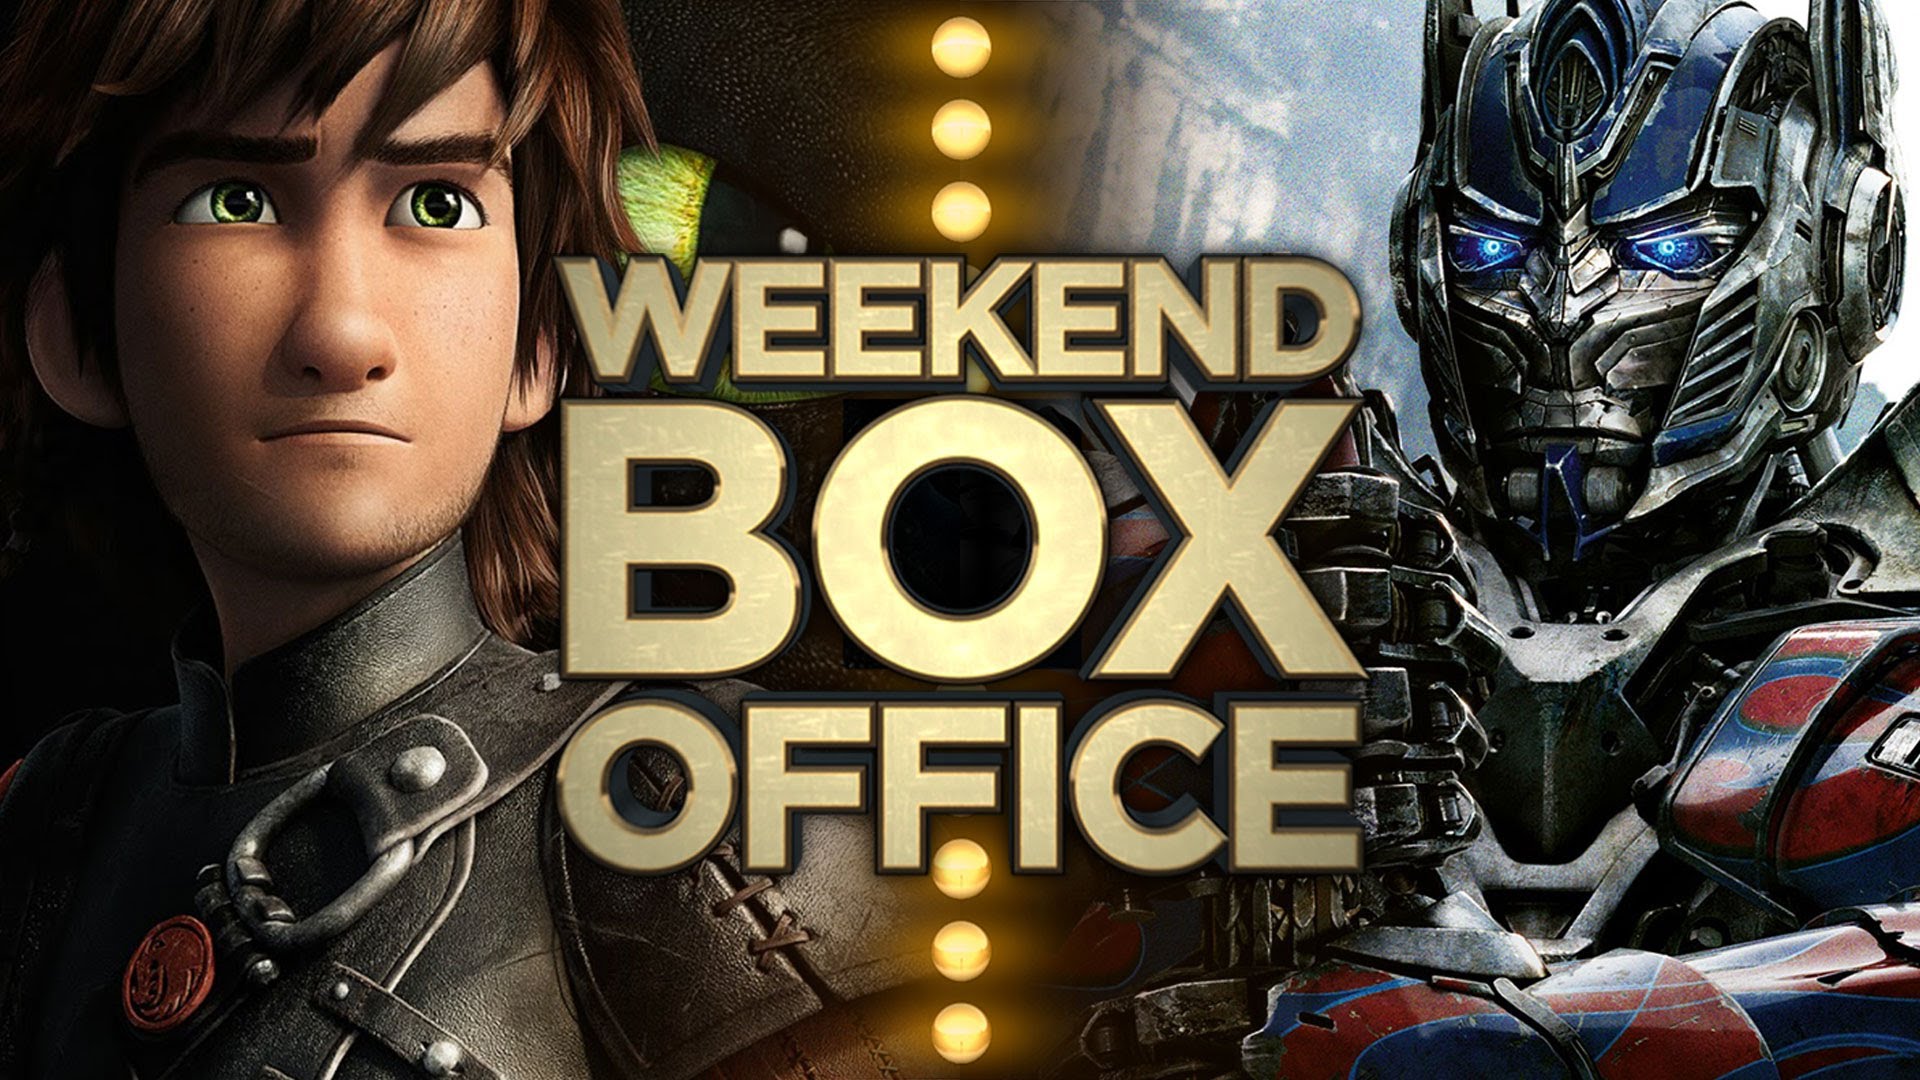 Box Office movie. Box Office. Weekend. Cloudy' sequel Tops weekend Box Office. Weekend box